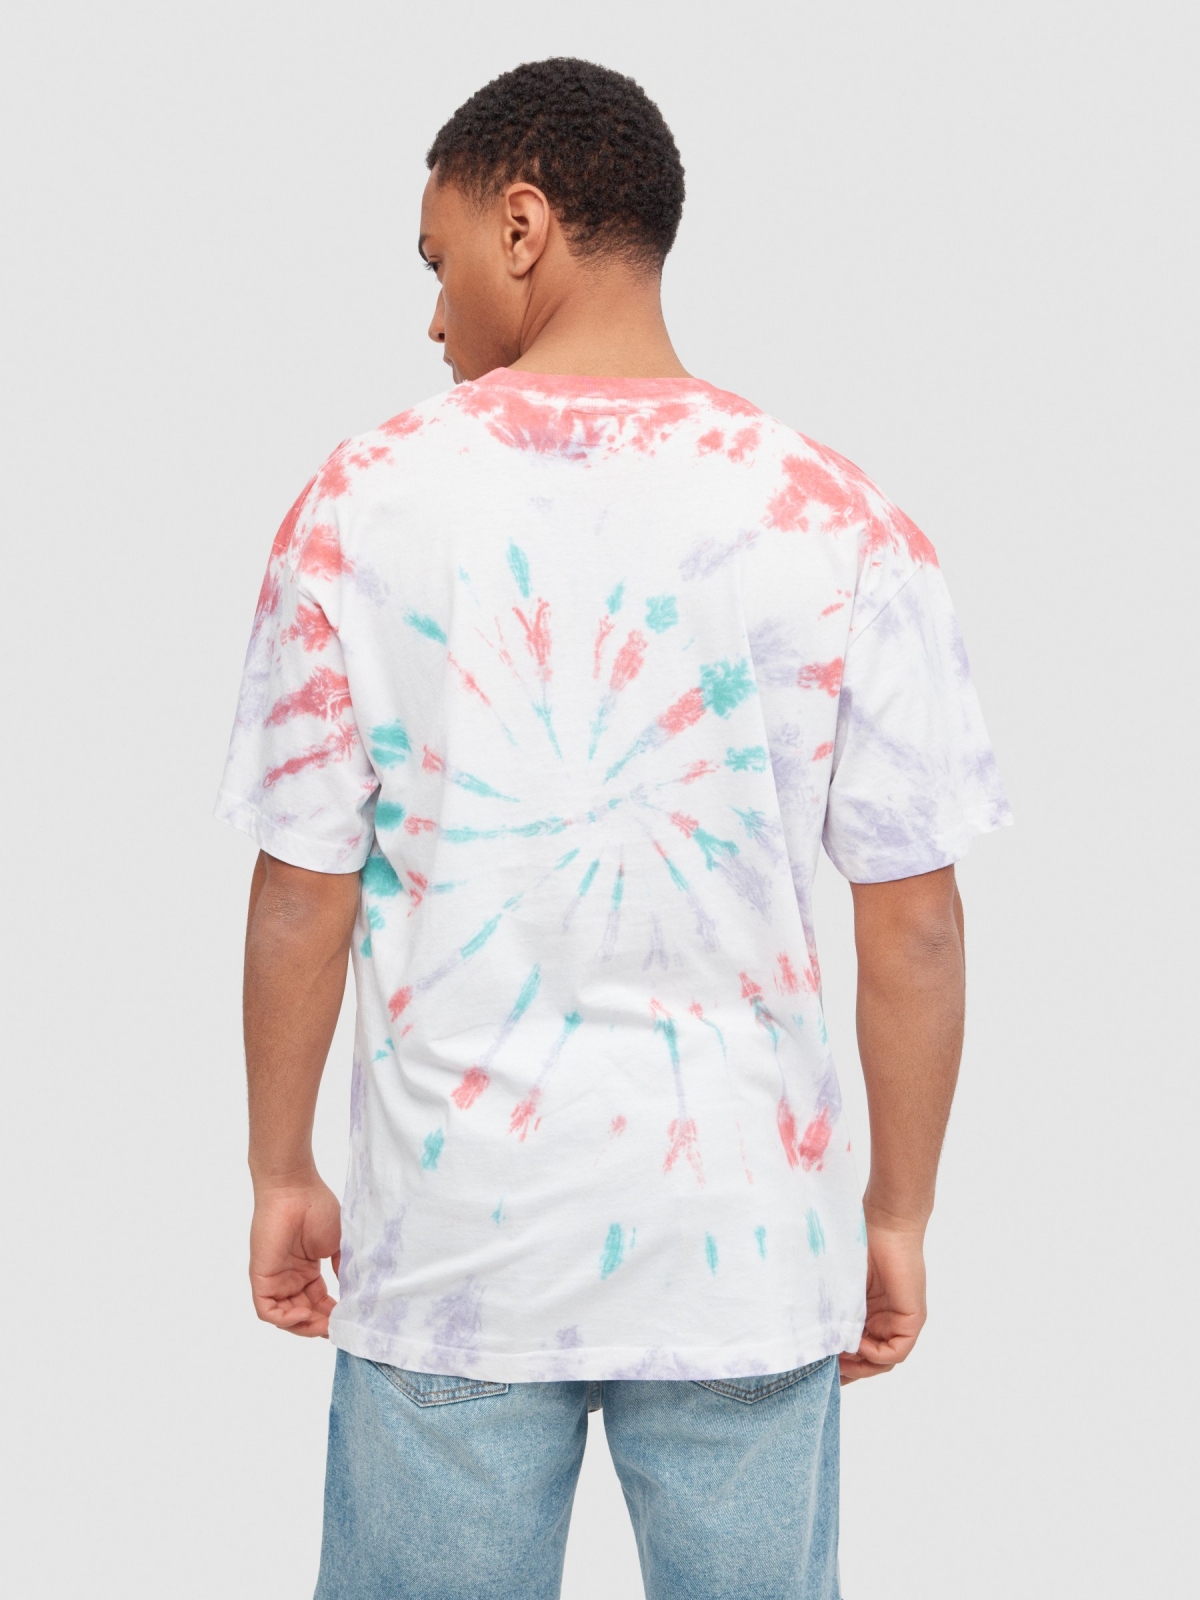 Multicoloured tie dye t-shirt white middle back view